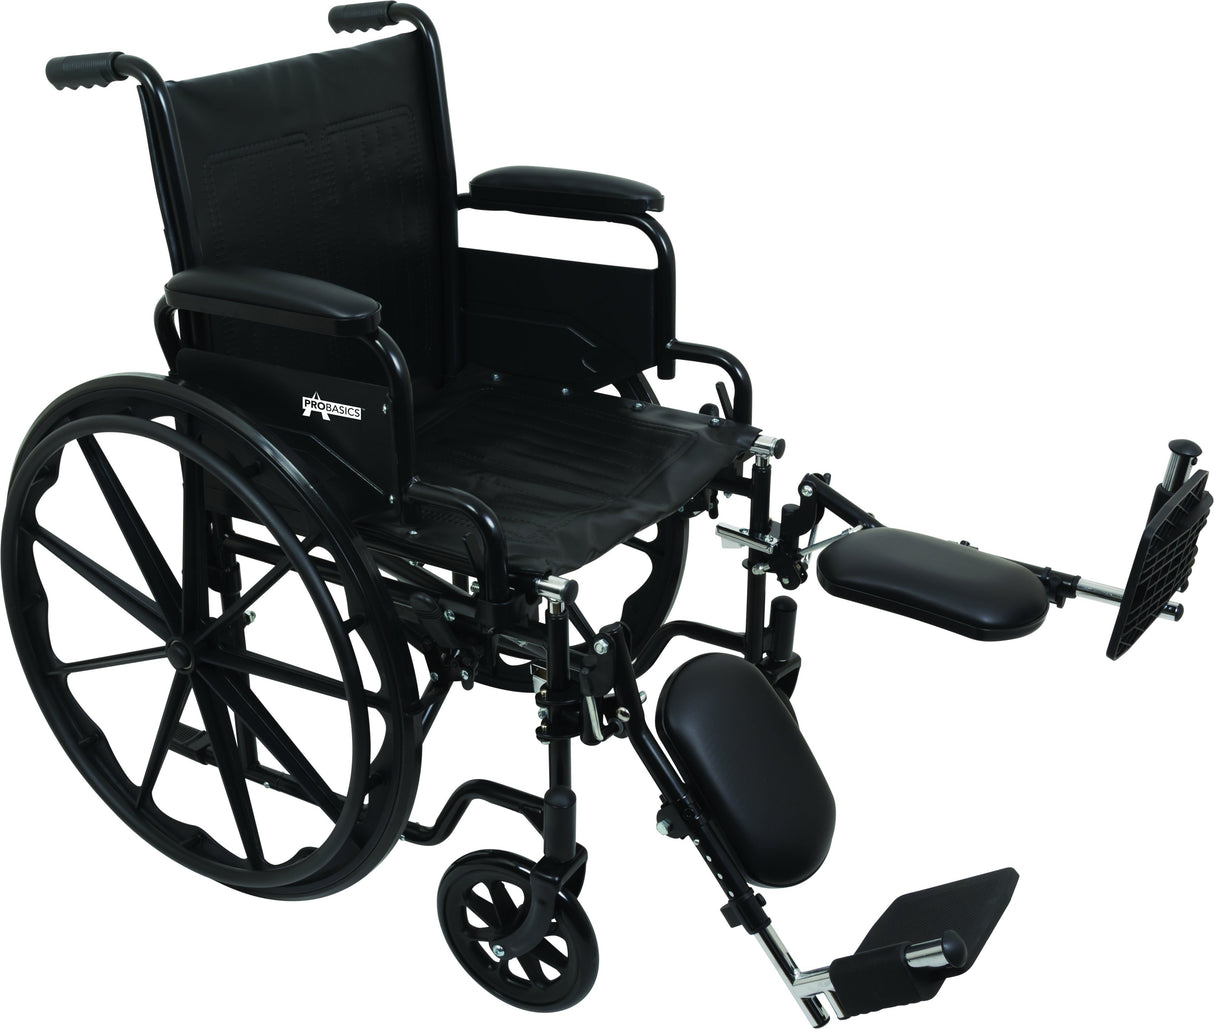 Lightweight Wheelchair with Elevated Foot Rest